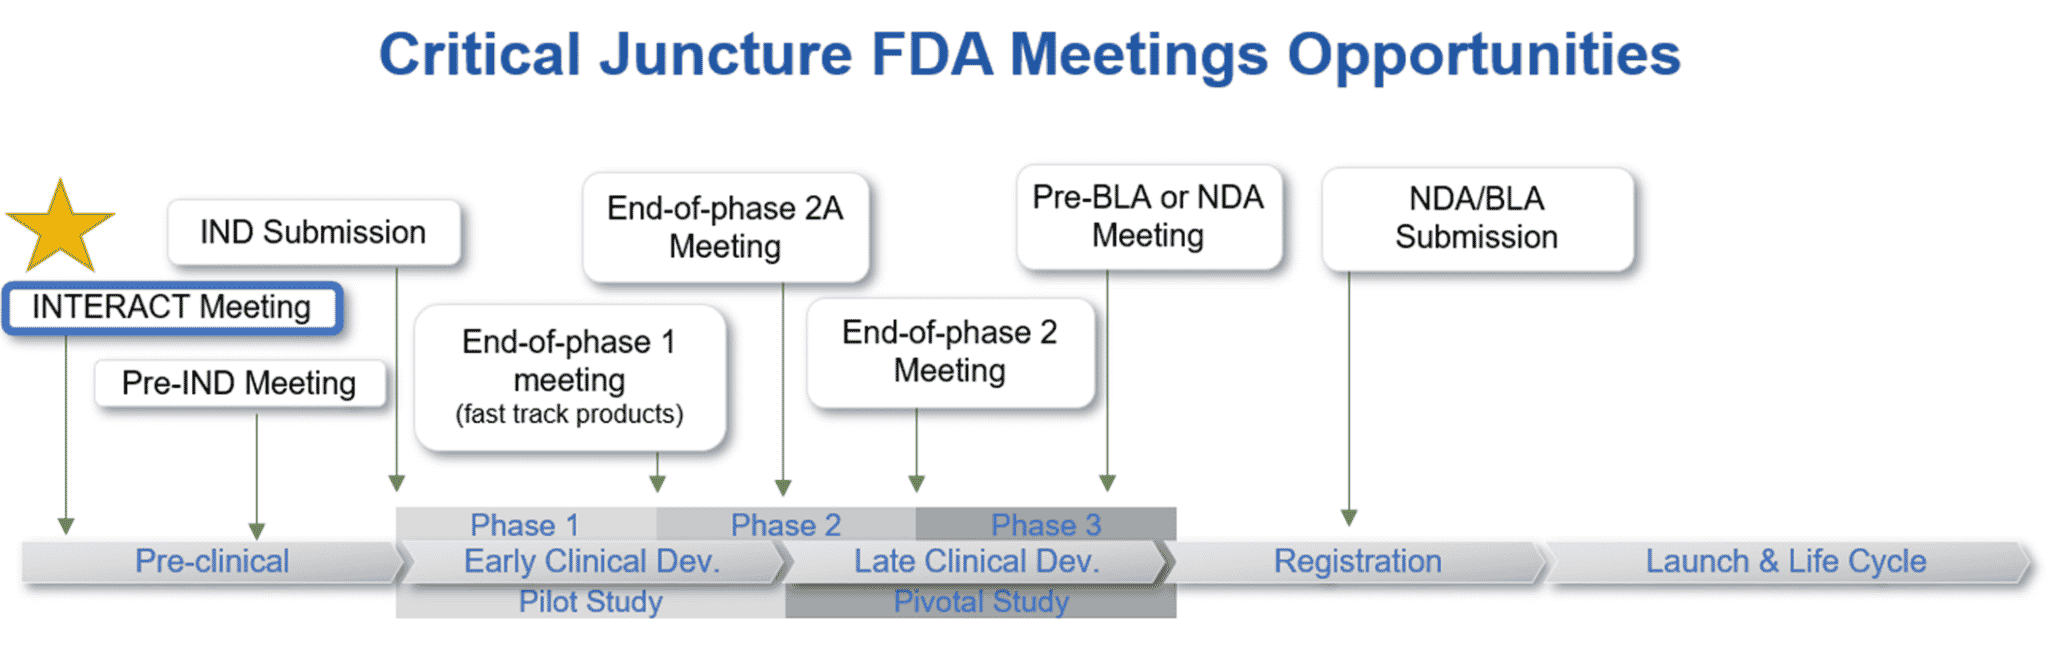 FDA Meeting Series How, When and What INTERACT Meetings